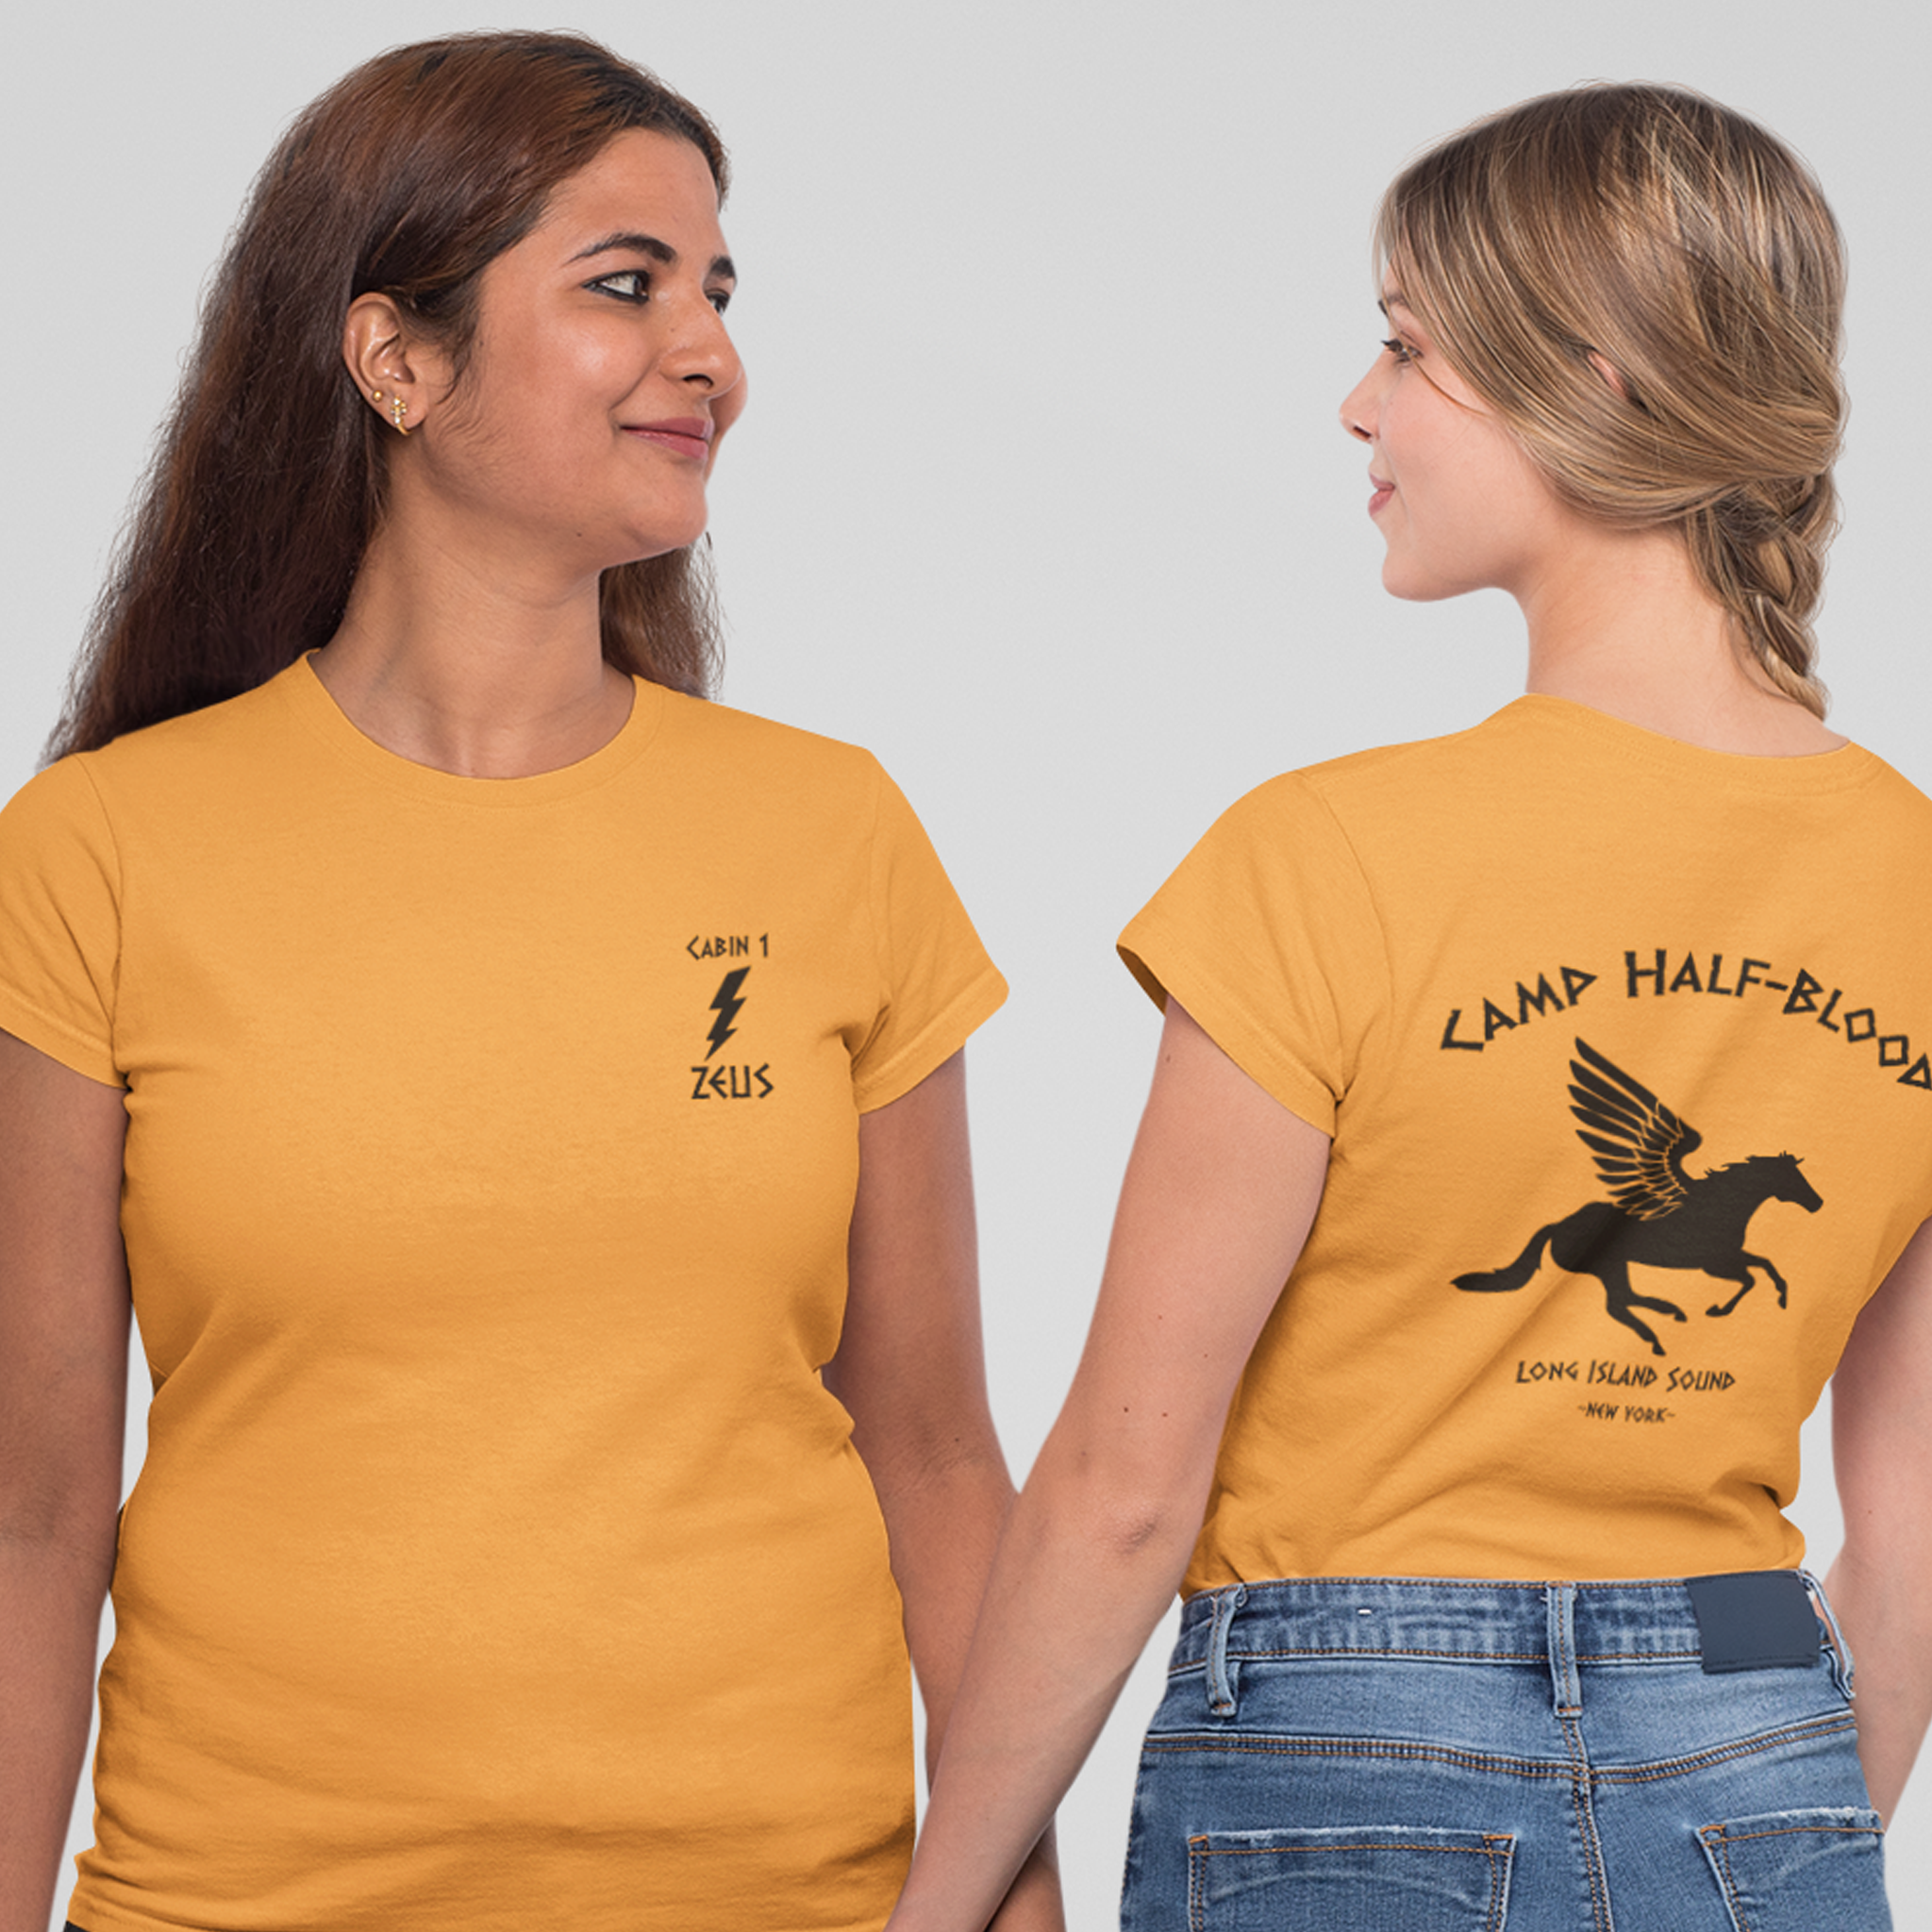 Percy Jackson - Camp Half Blood with Cabin Number, Logo, and Name – Black  Cat Tees